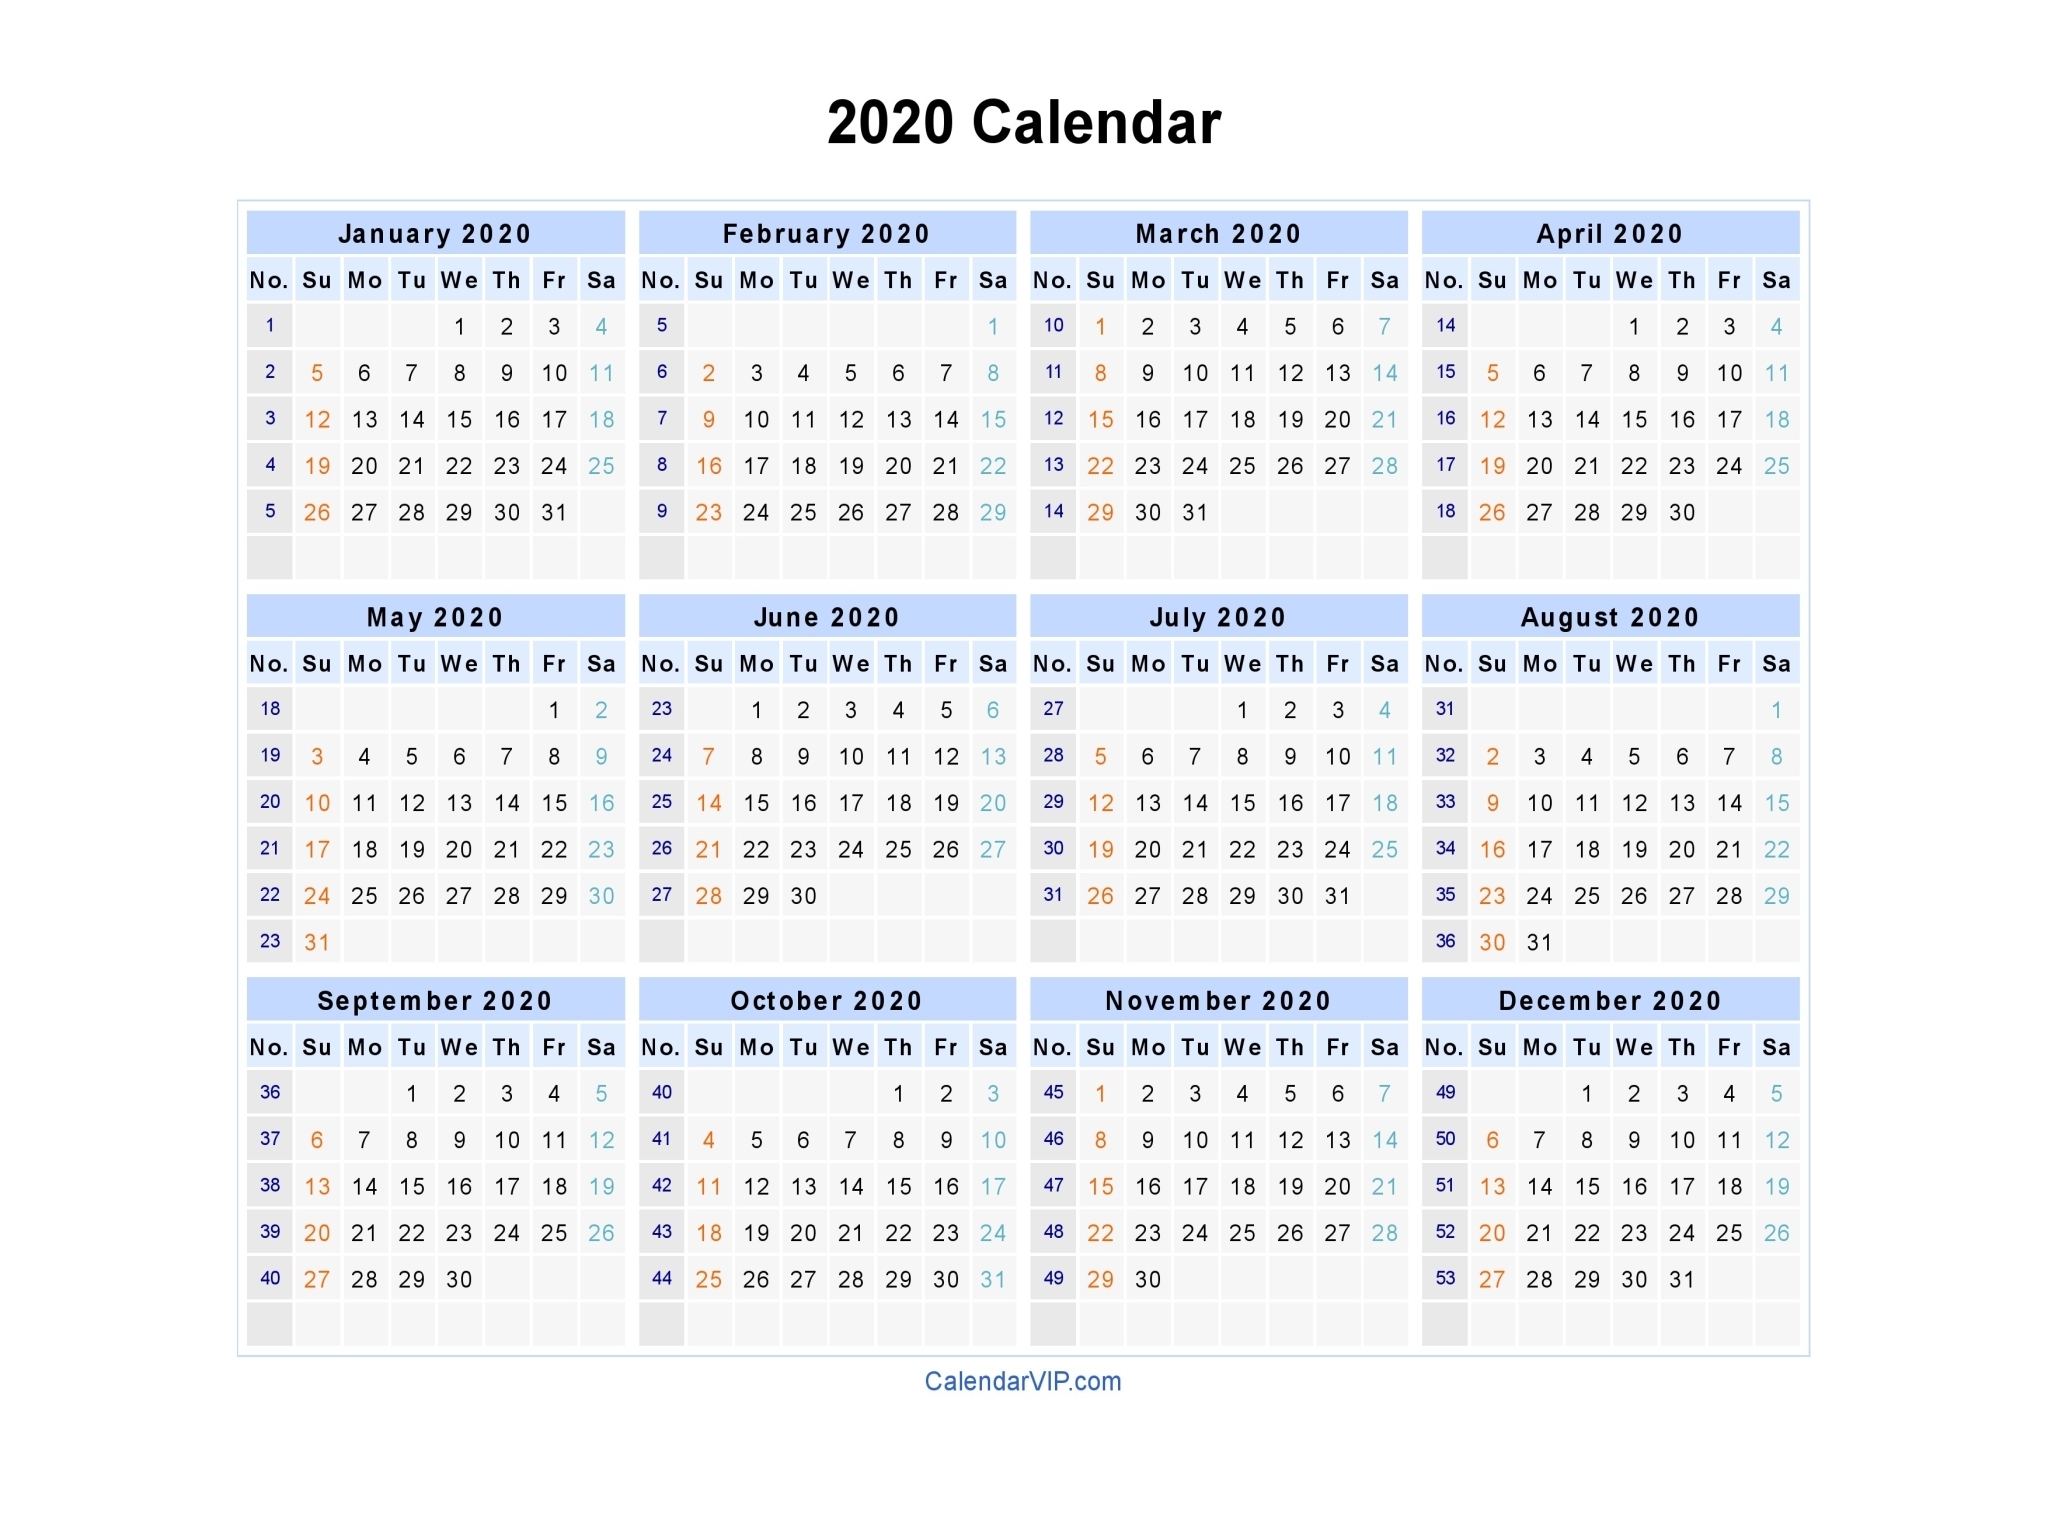 2020 Calendar - Blank Printable Calendar Template In Pdf Word Excel within 2020 Calendars To Fill In